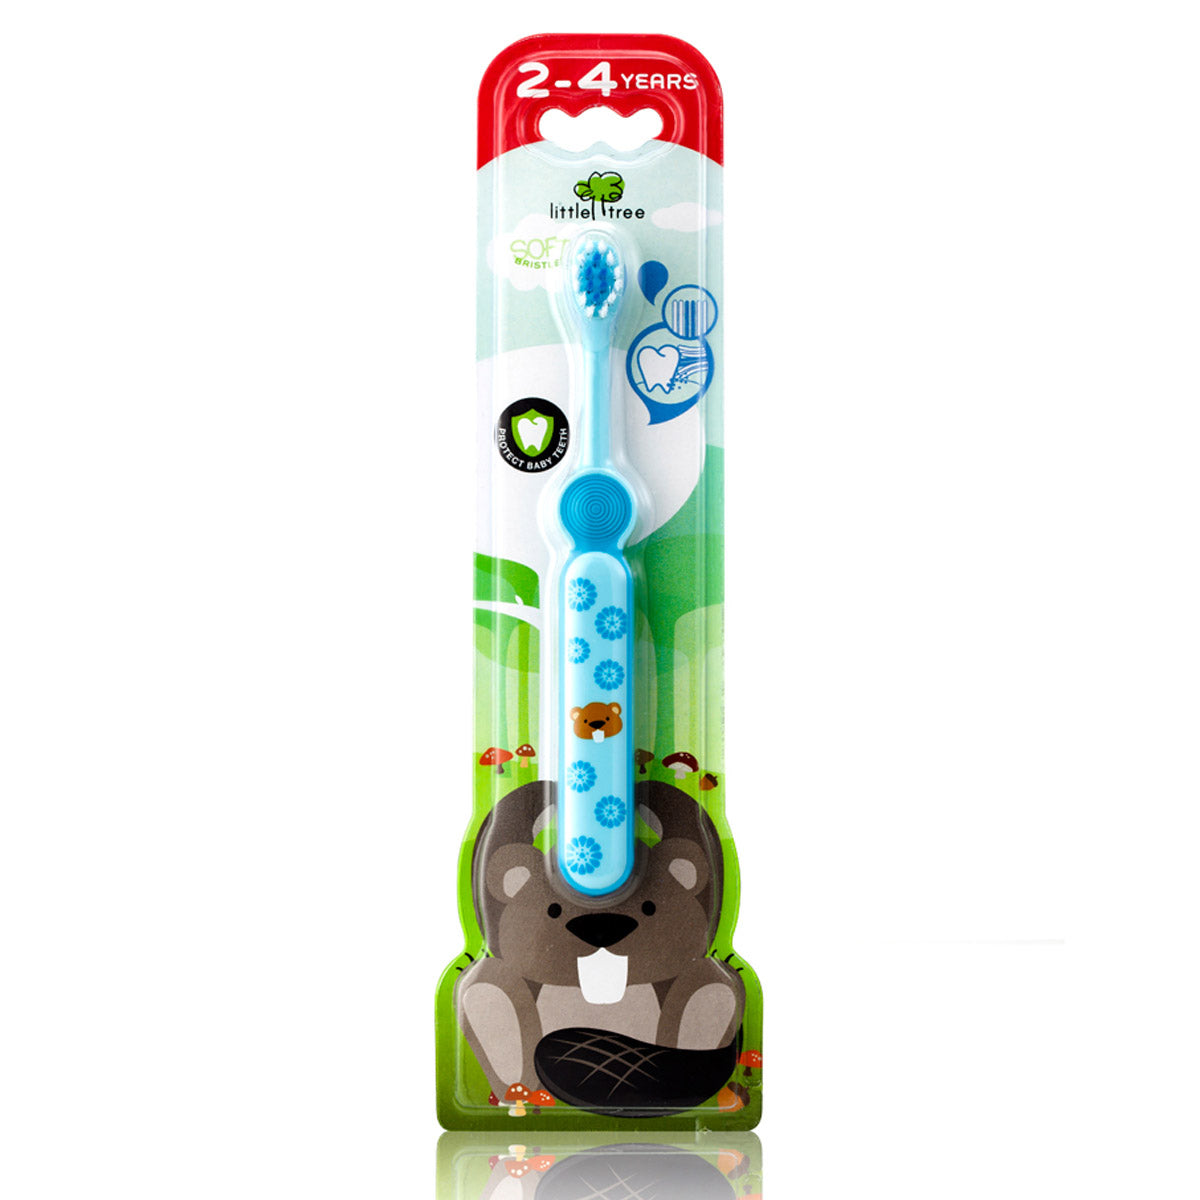 Little Tree Toothbrush 2-4 Years Old